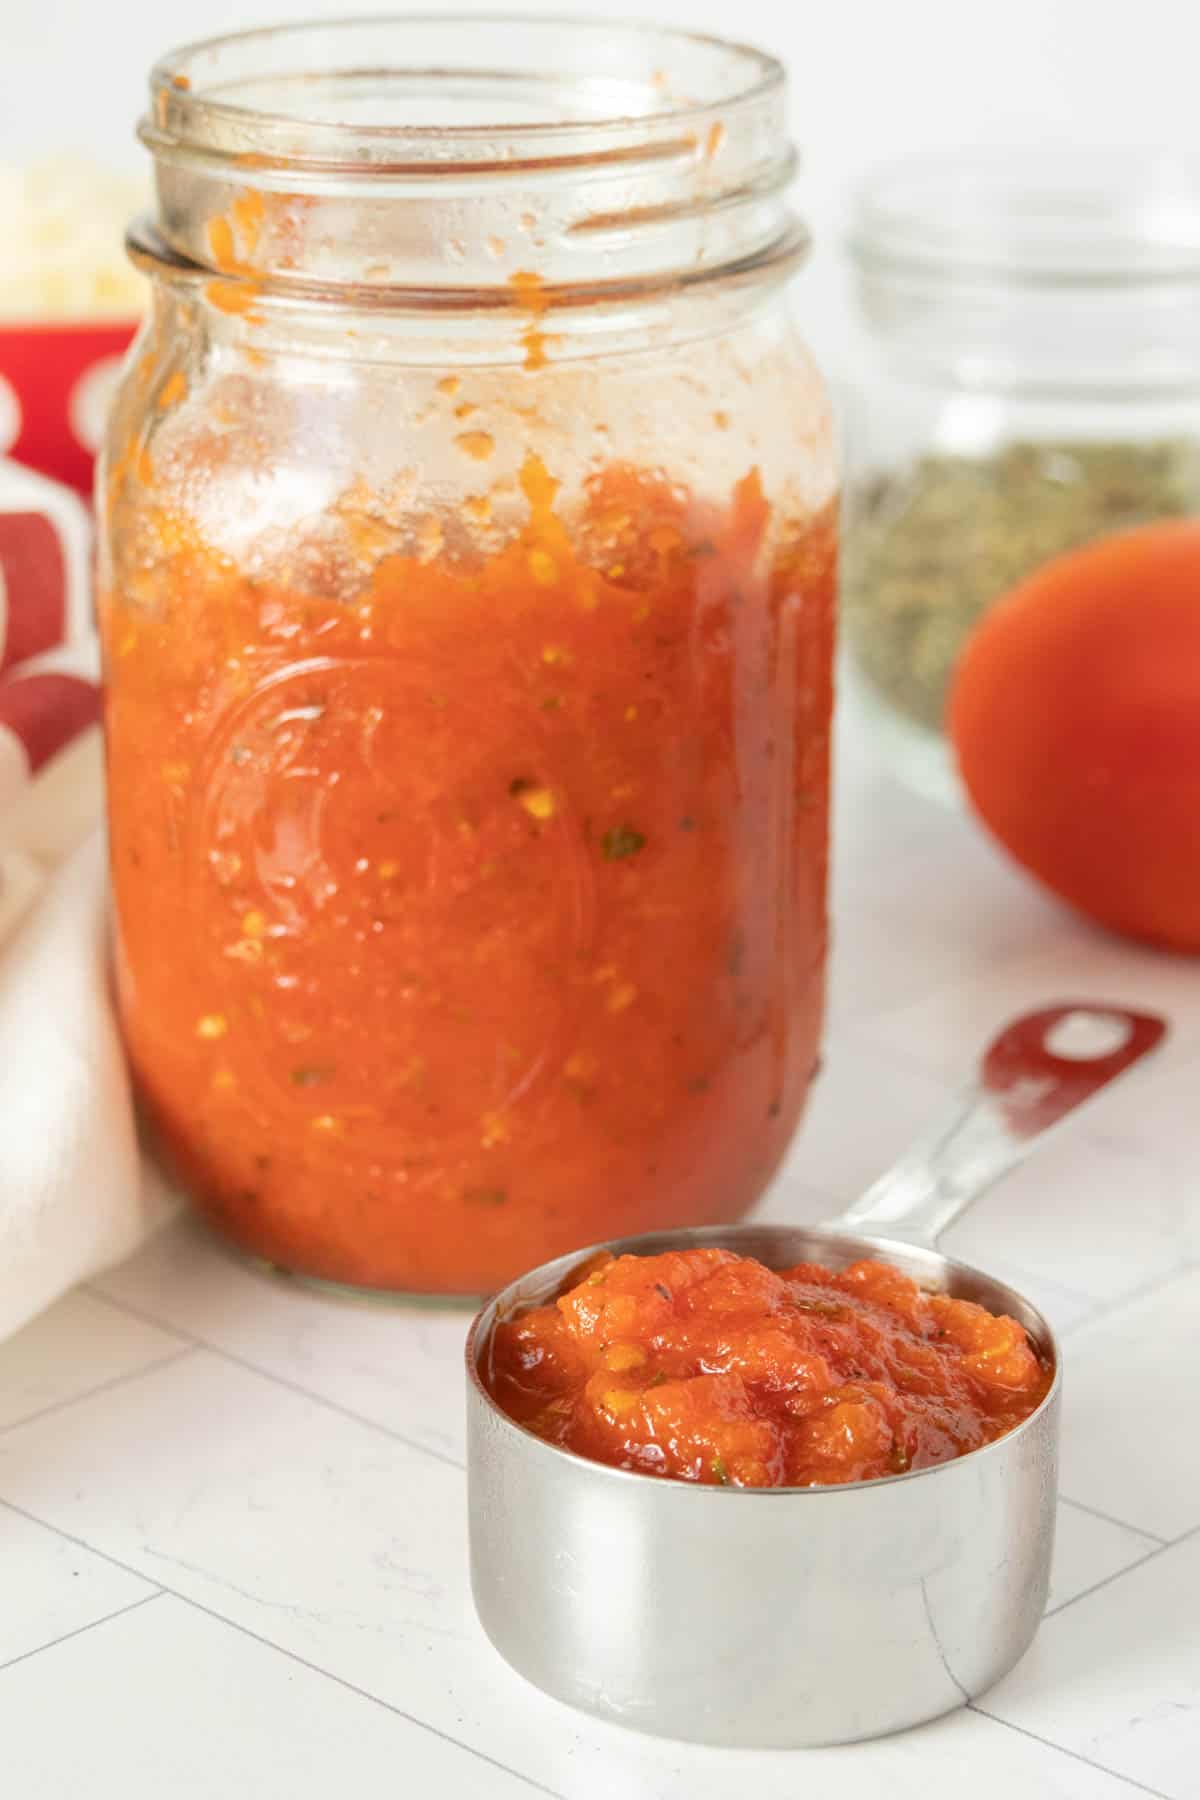 A jar of pizza sauce with a spoon next to it.